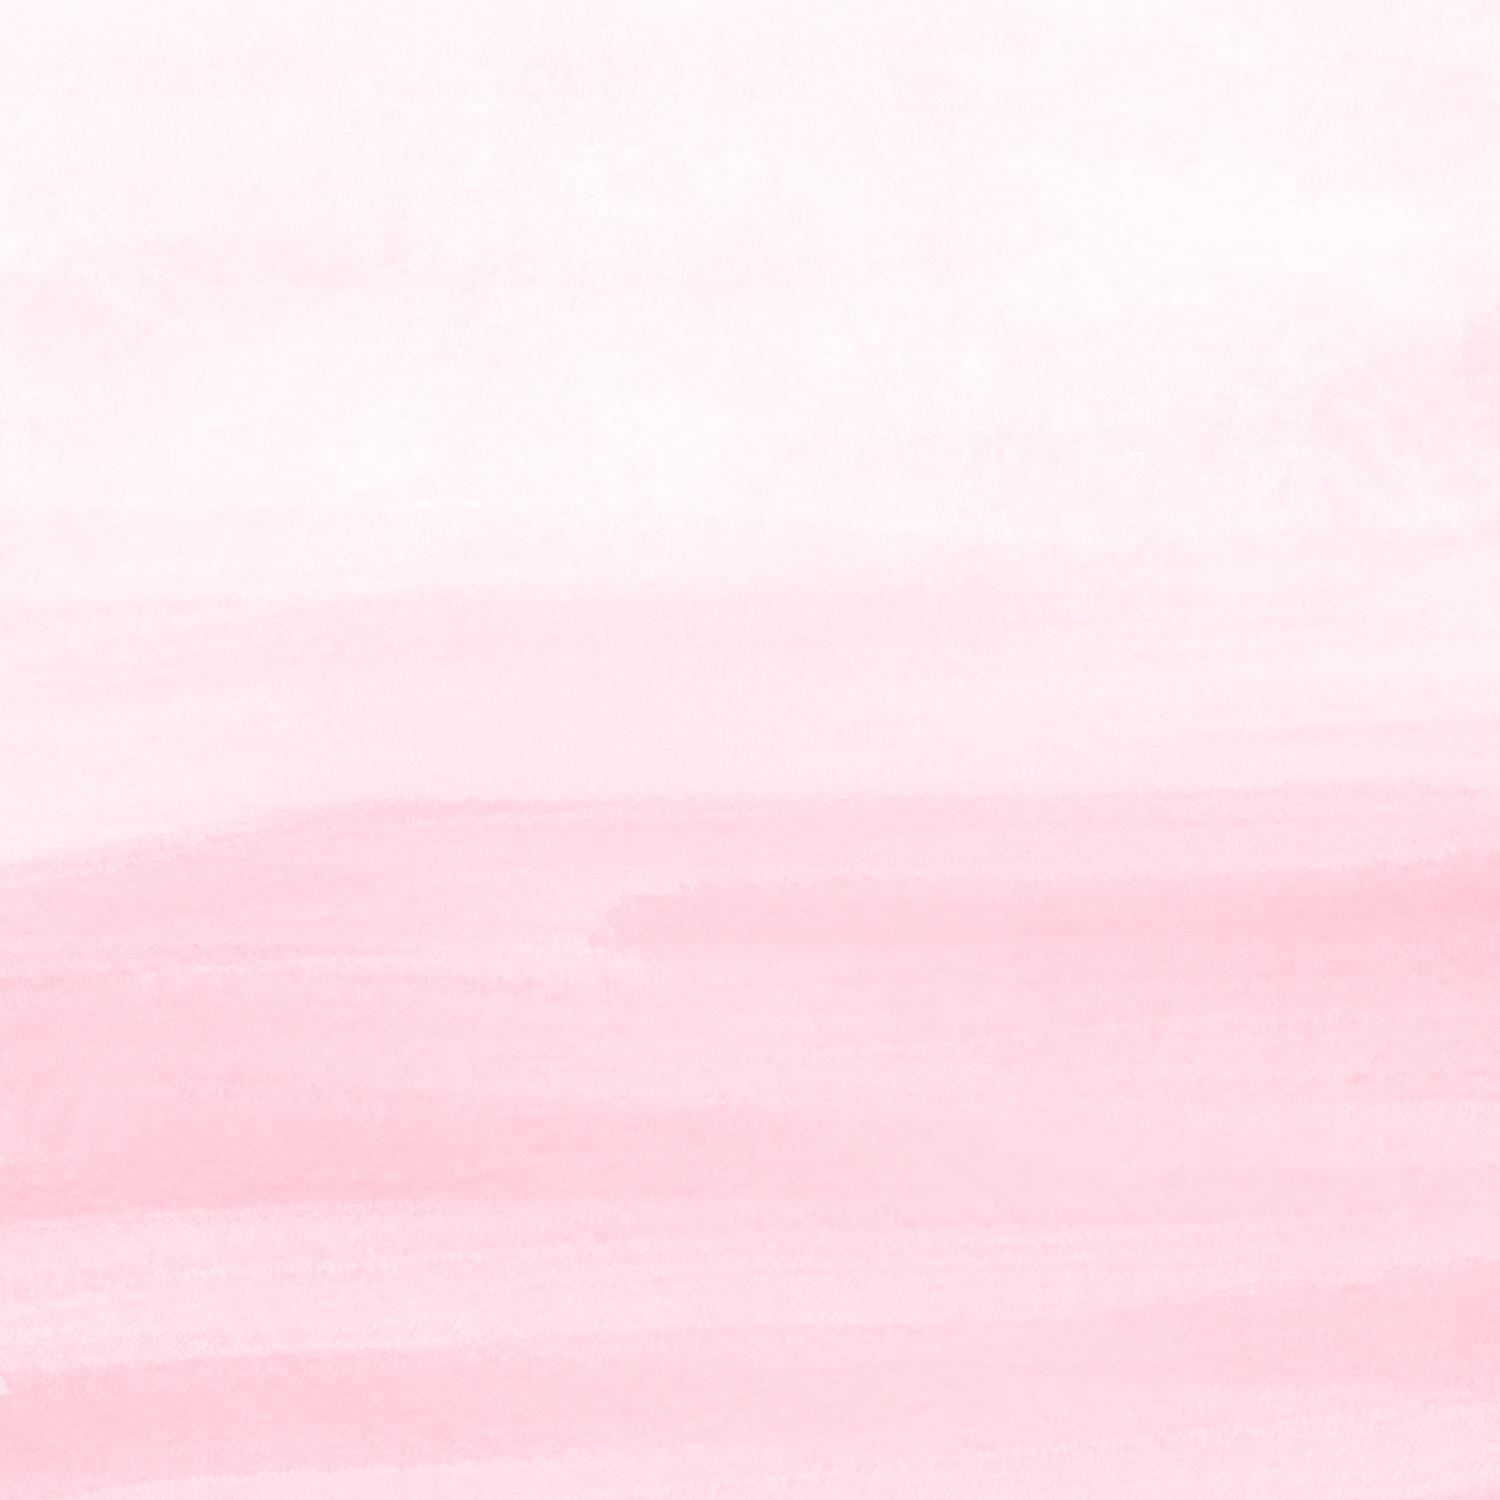 Abstract Pink Watercolor Background